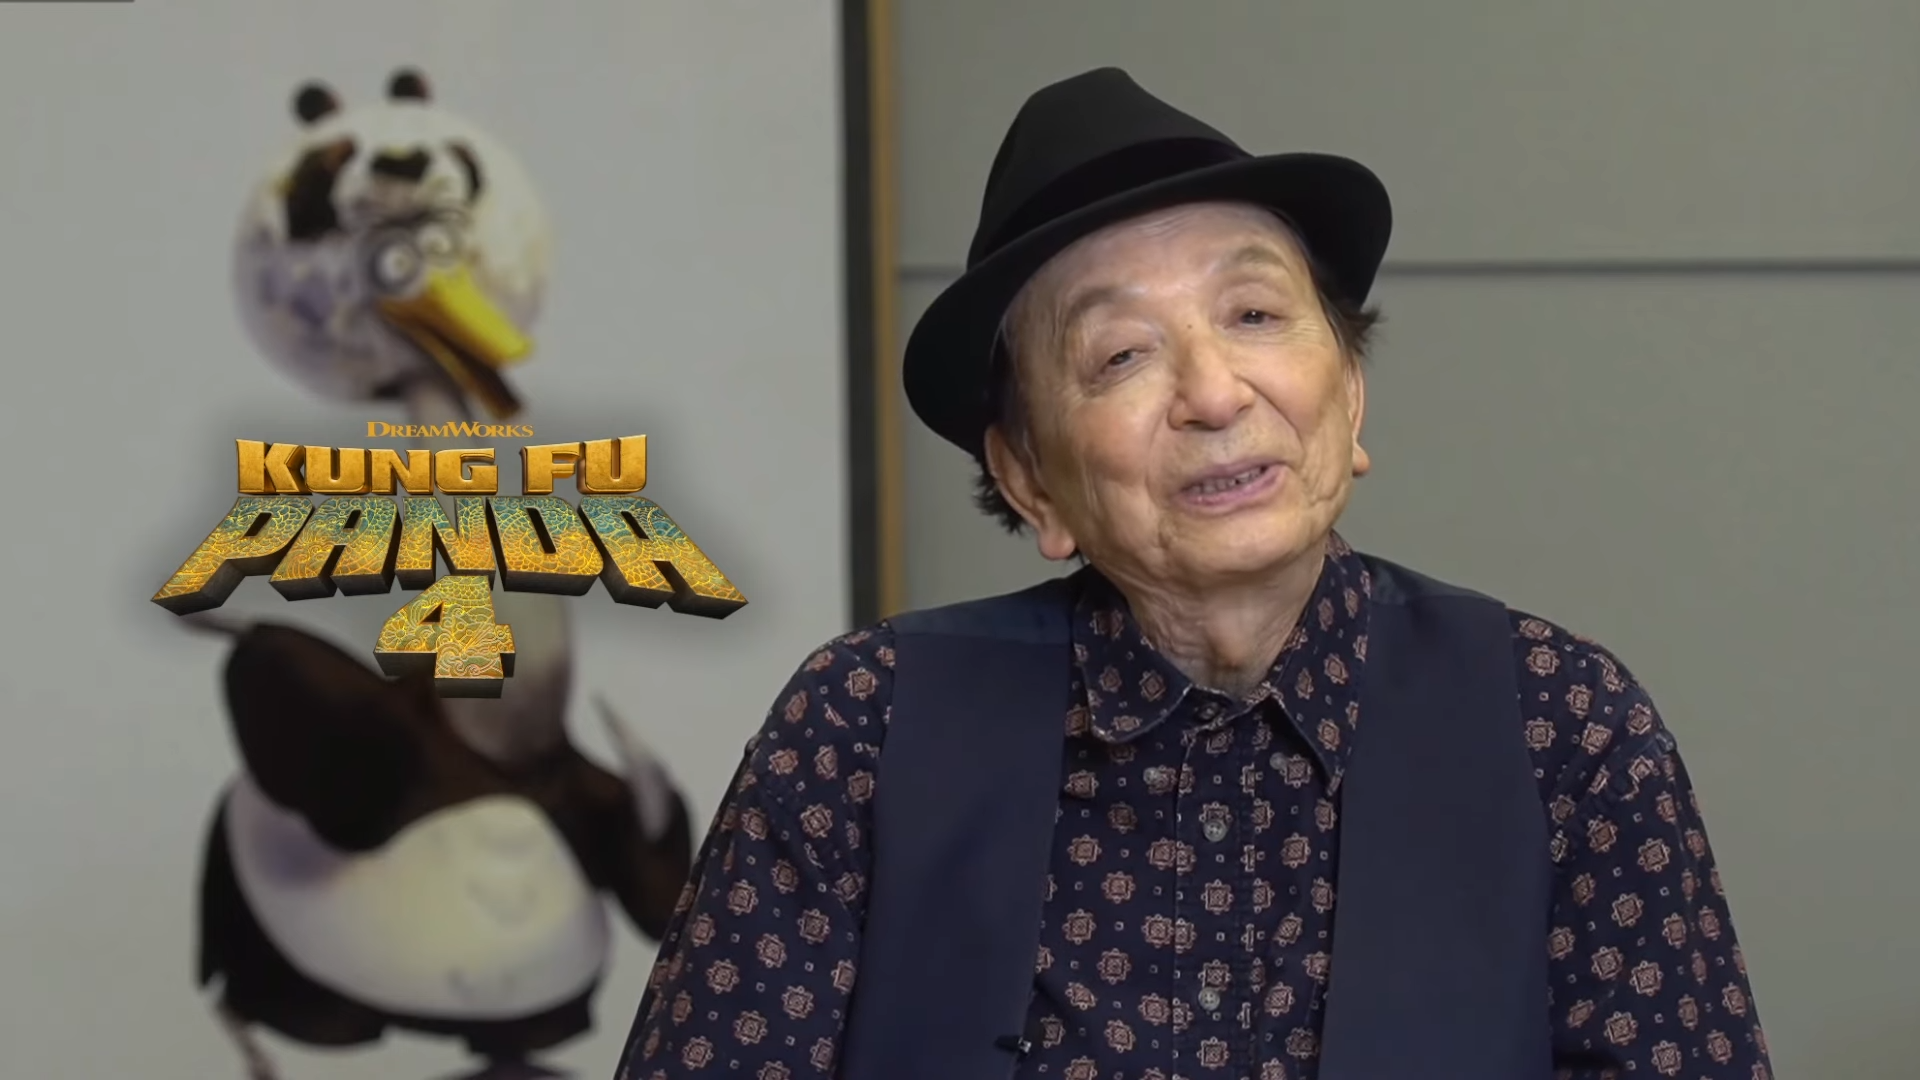 KUNG FU PANDA 4’s James Hong Would Love to Continue Playing Mr. Ping in Kung Fu Panda 5, 6, 7, and Beyond